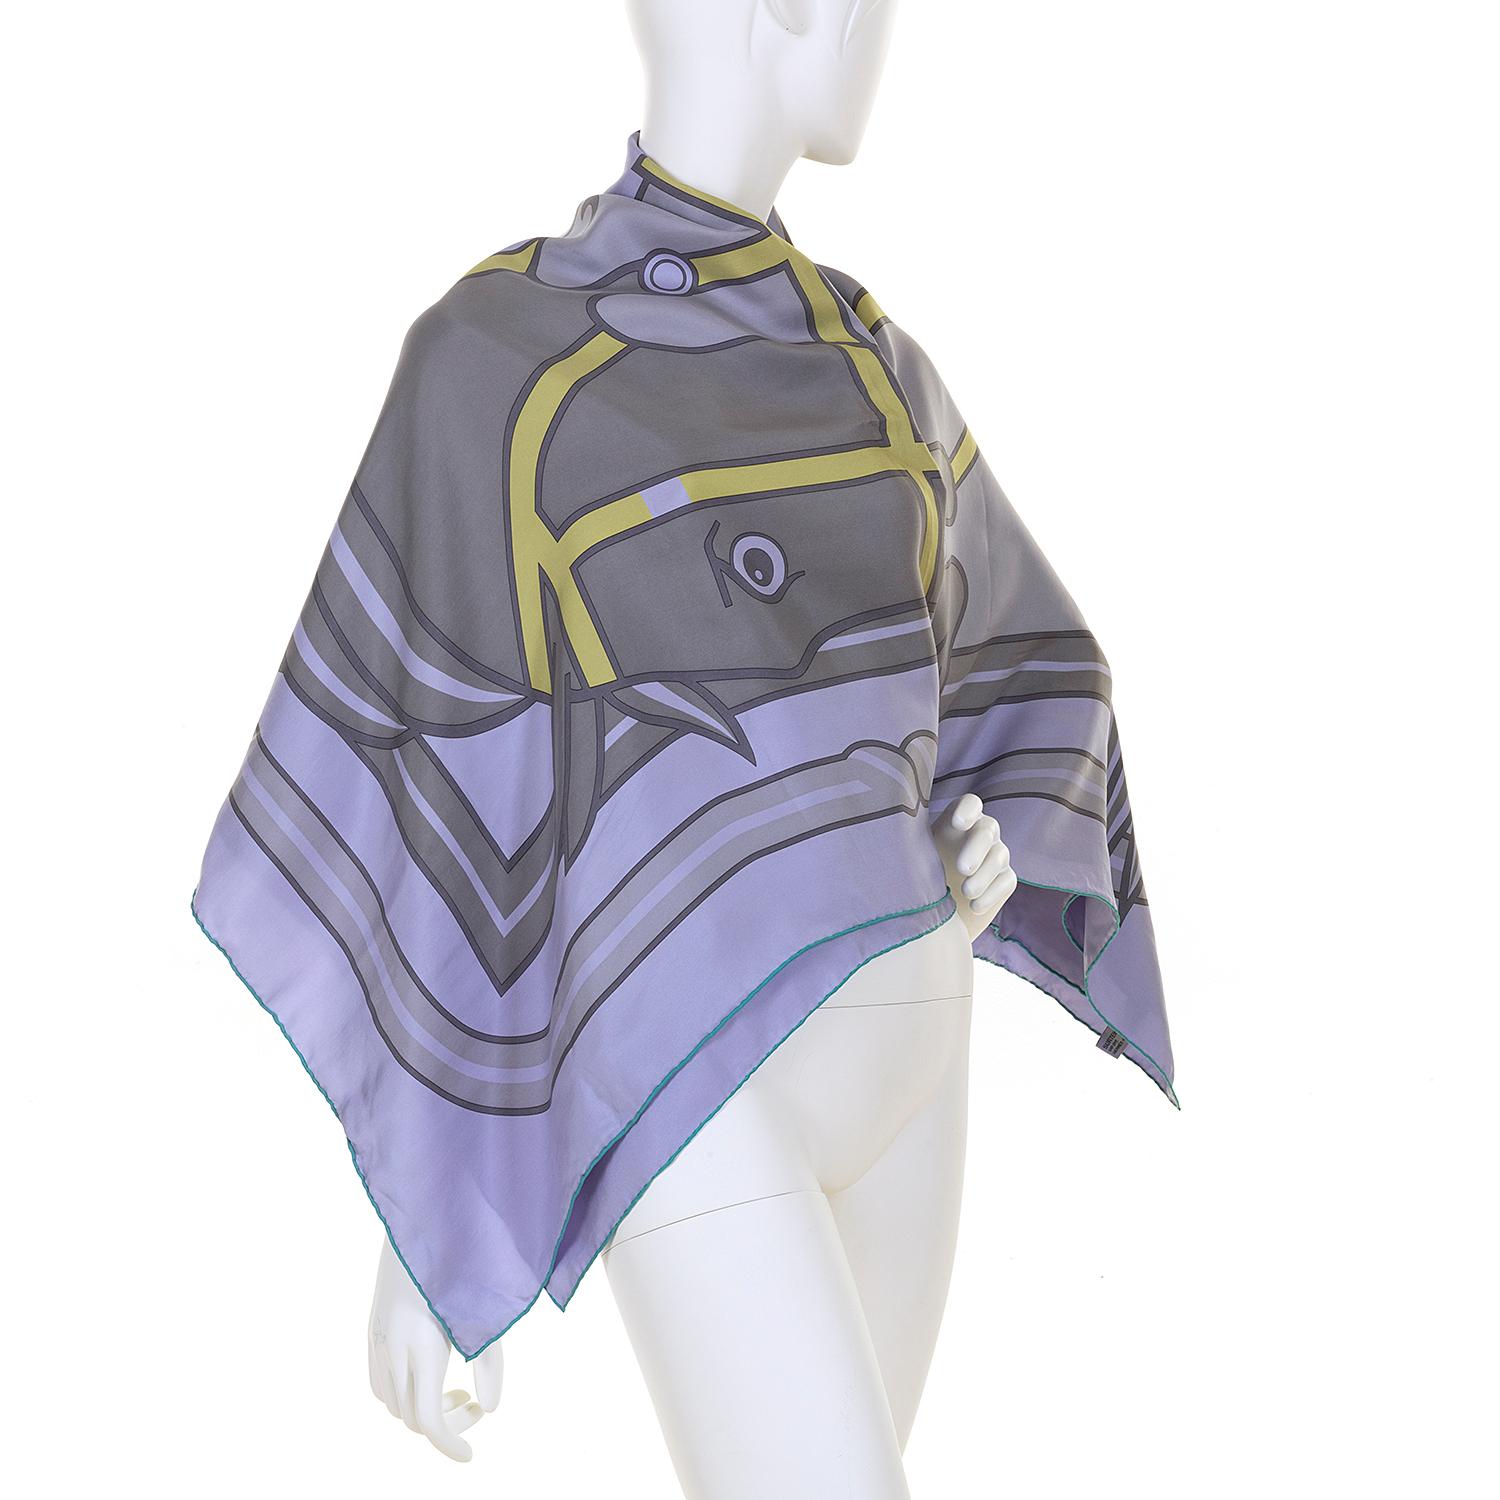 In beautiful colour ways of Lilac, Grey & Chartreuse, this very rare Hermes 140cm (55in. x 55in.) equine themed, Silk Shawl, 'Quadridge' is in pristine, 'Store-Fresh' condition. From a private collection in Paris, France, the Shawl still retains